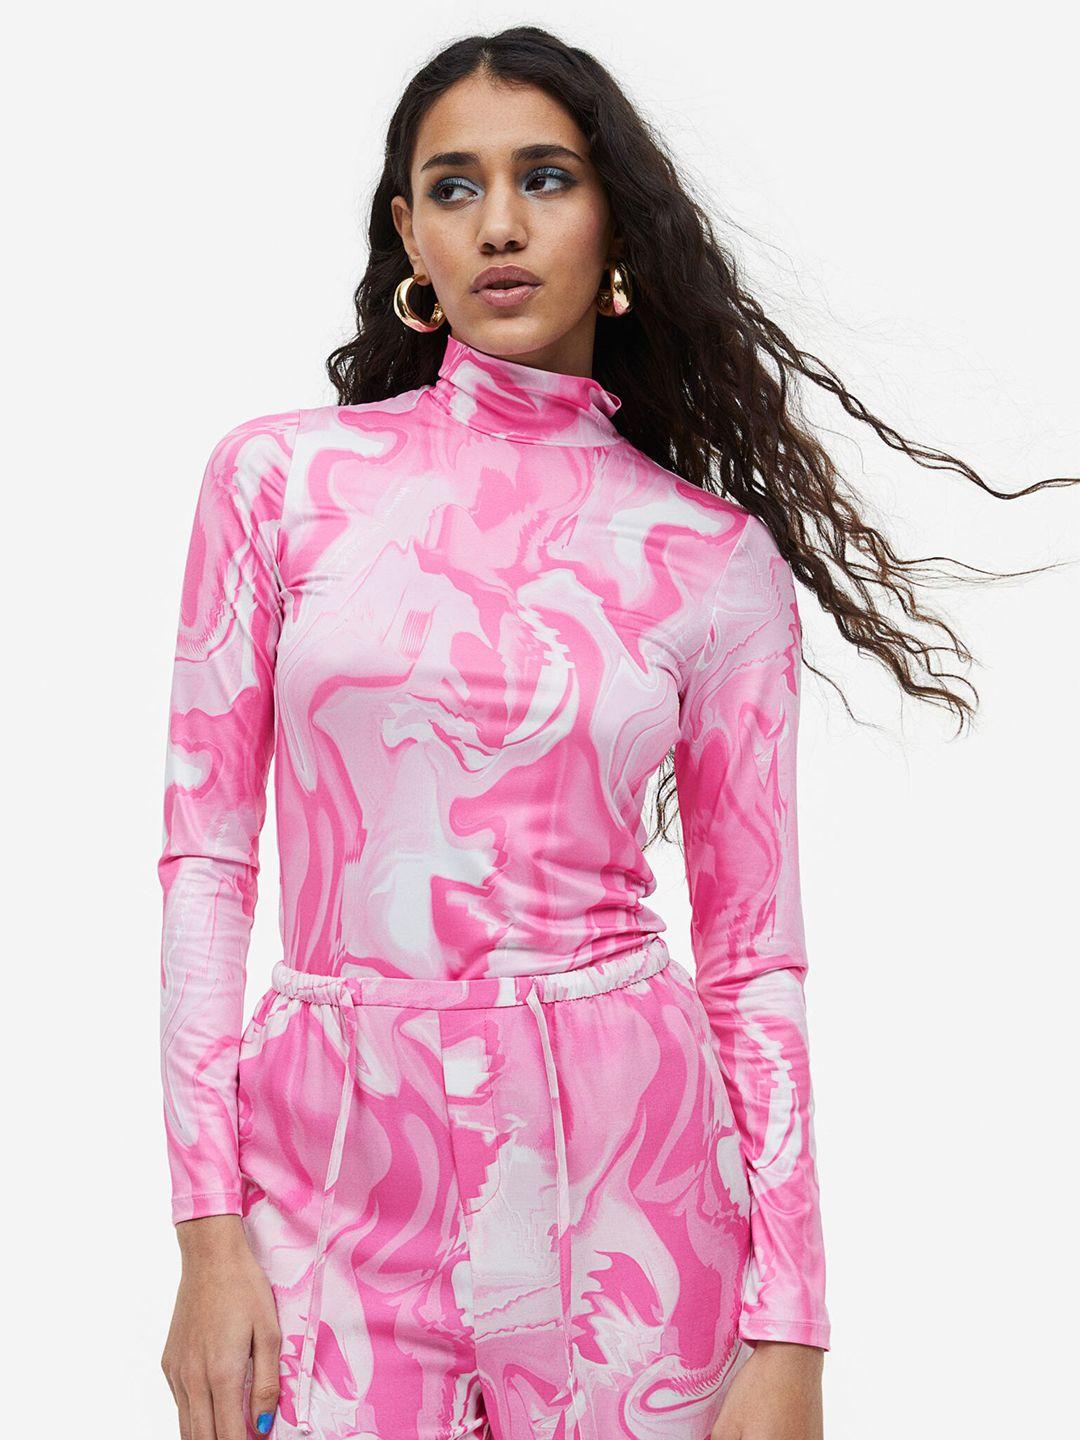 h&m printed long-sleeved jersey top